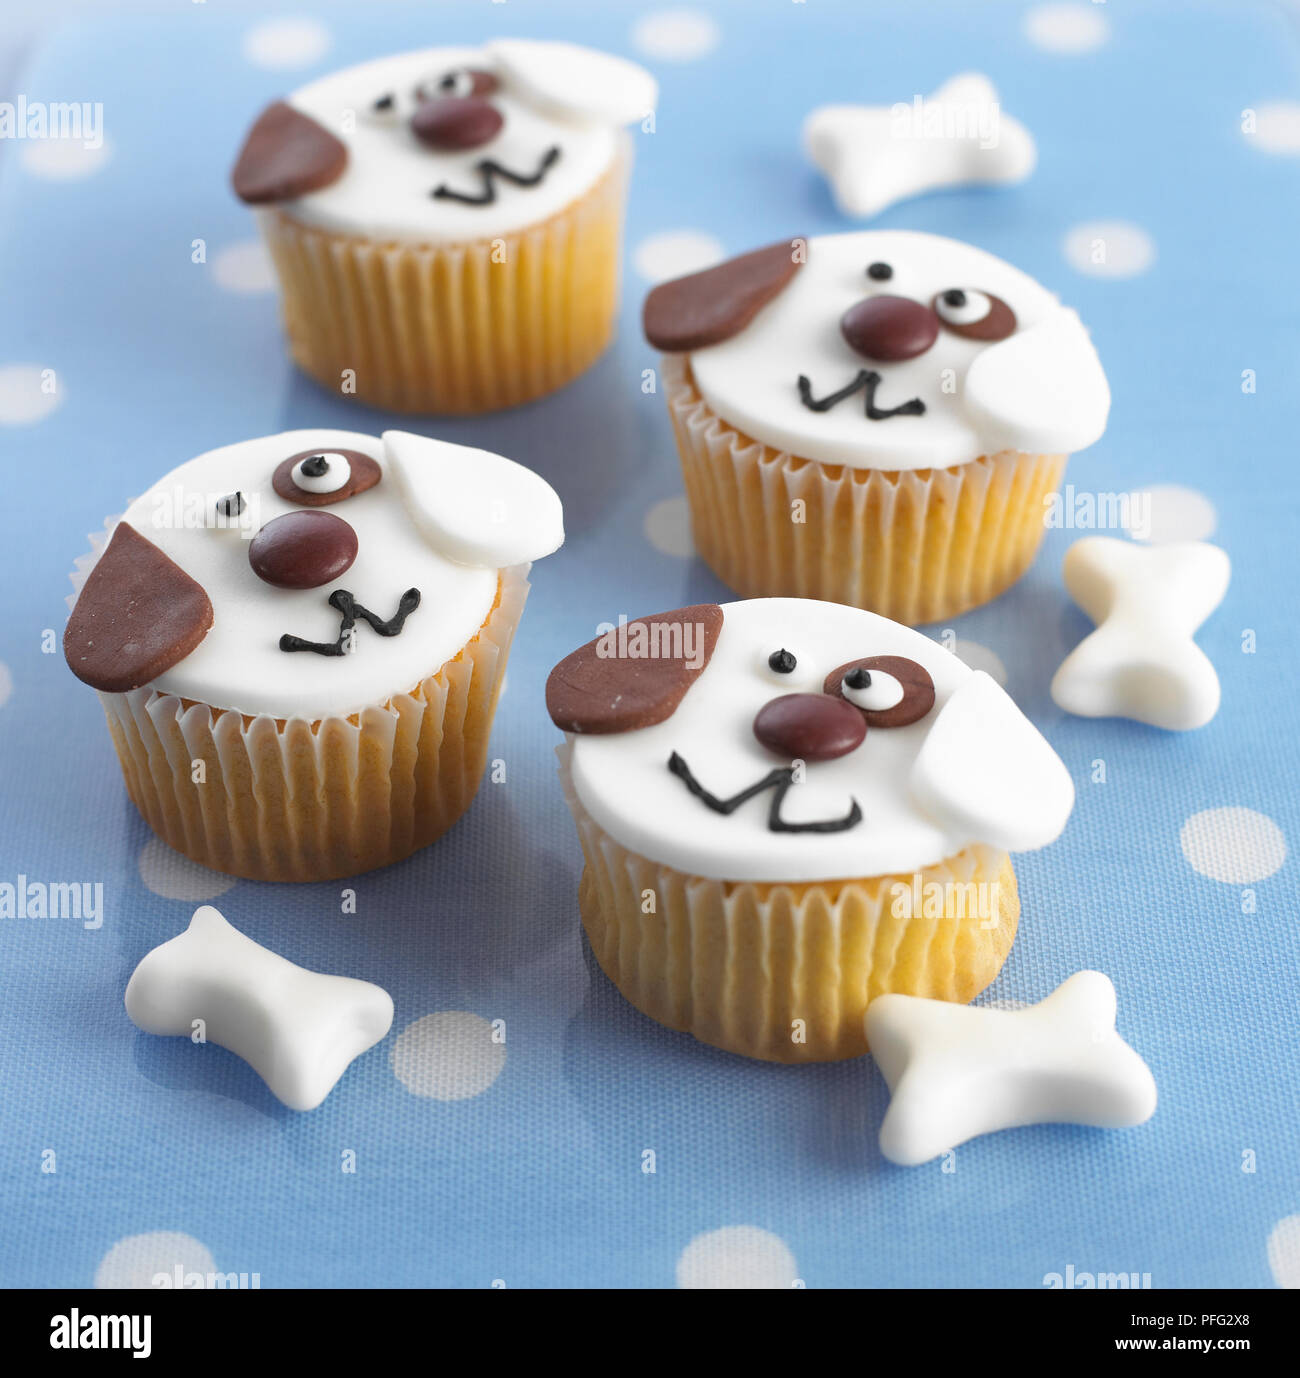 Cupcakes For Dogs High Resolution Stock Photography and Images - Alamy